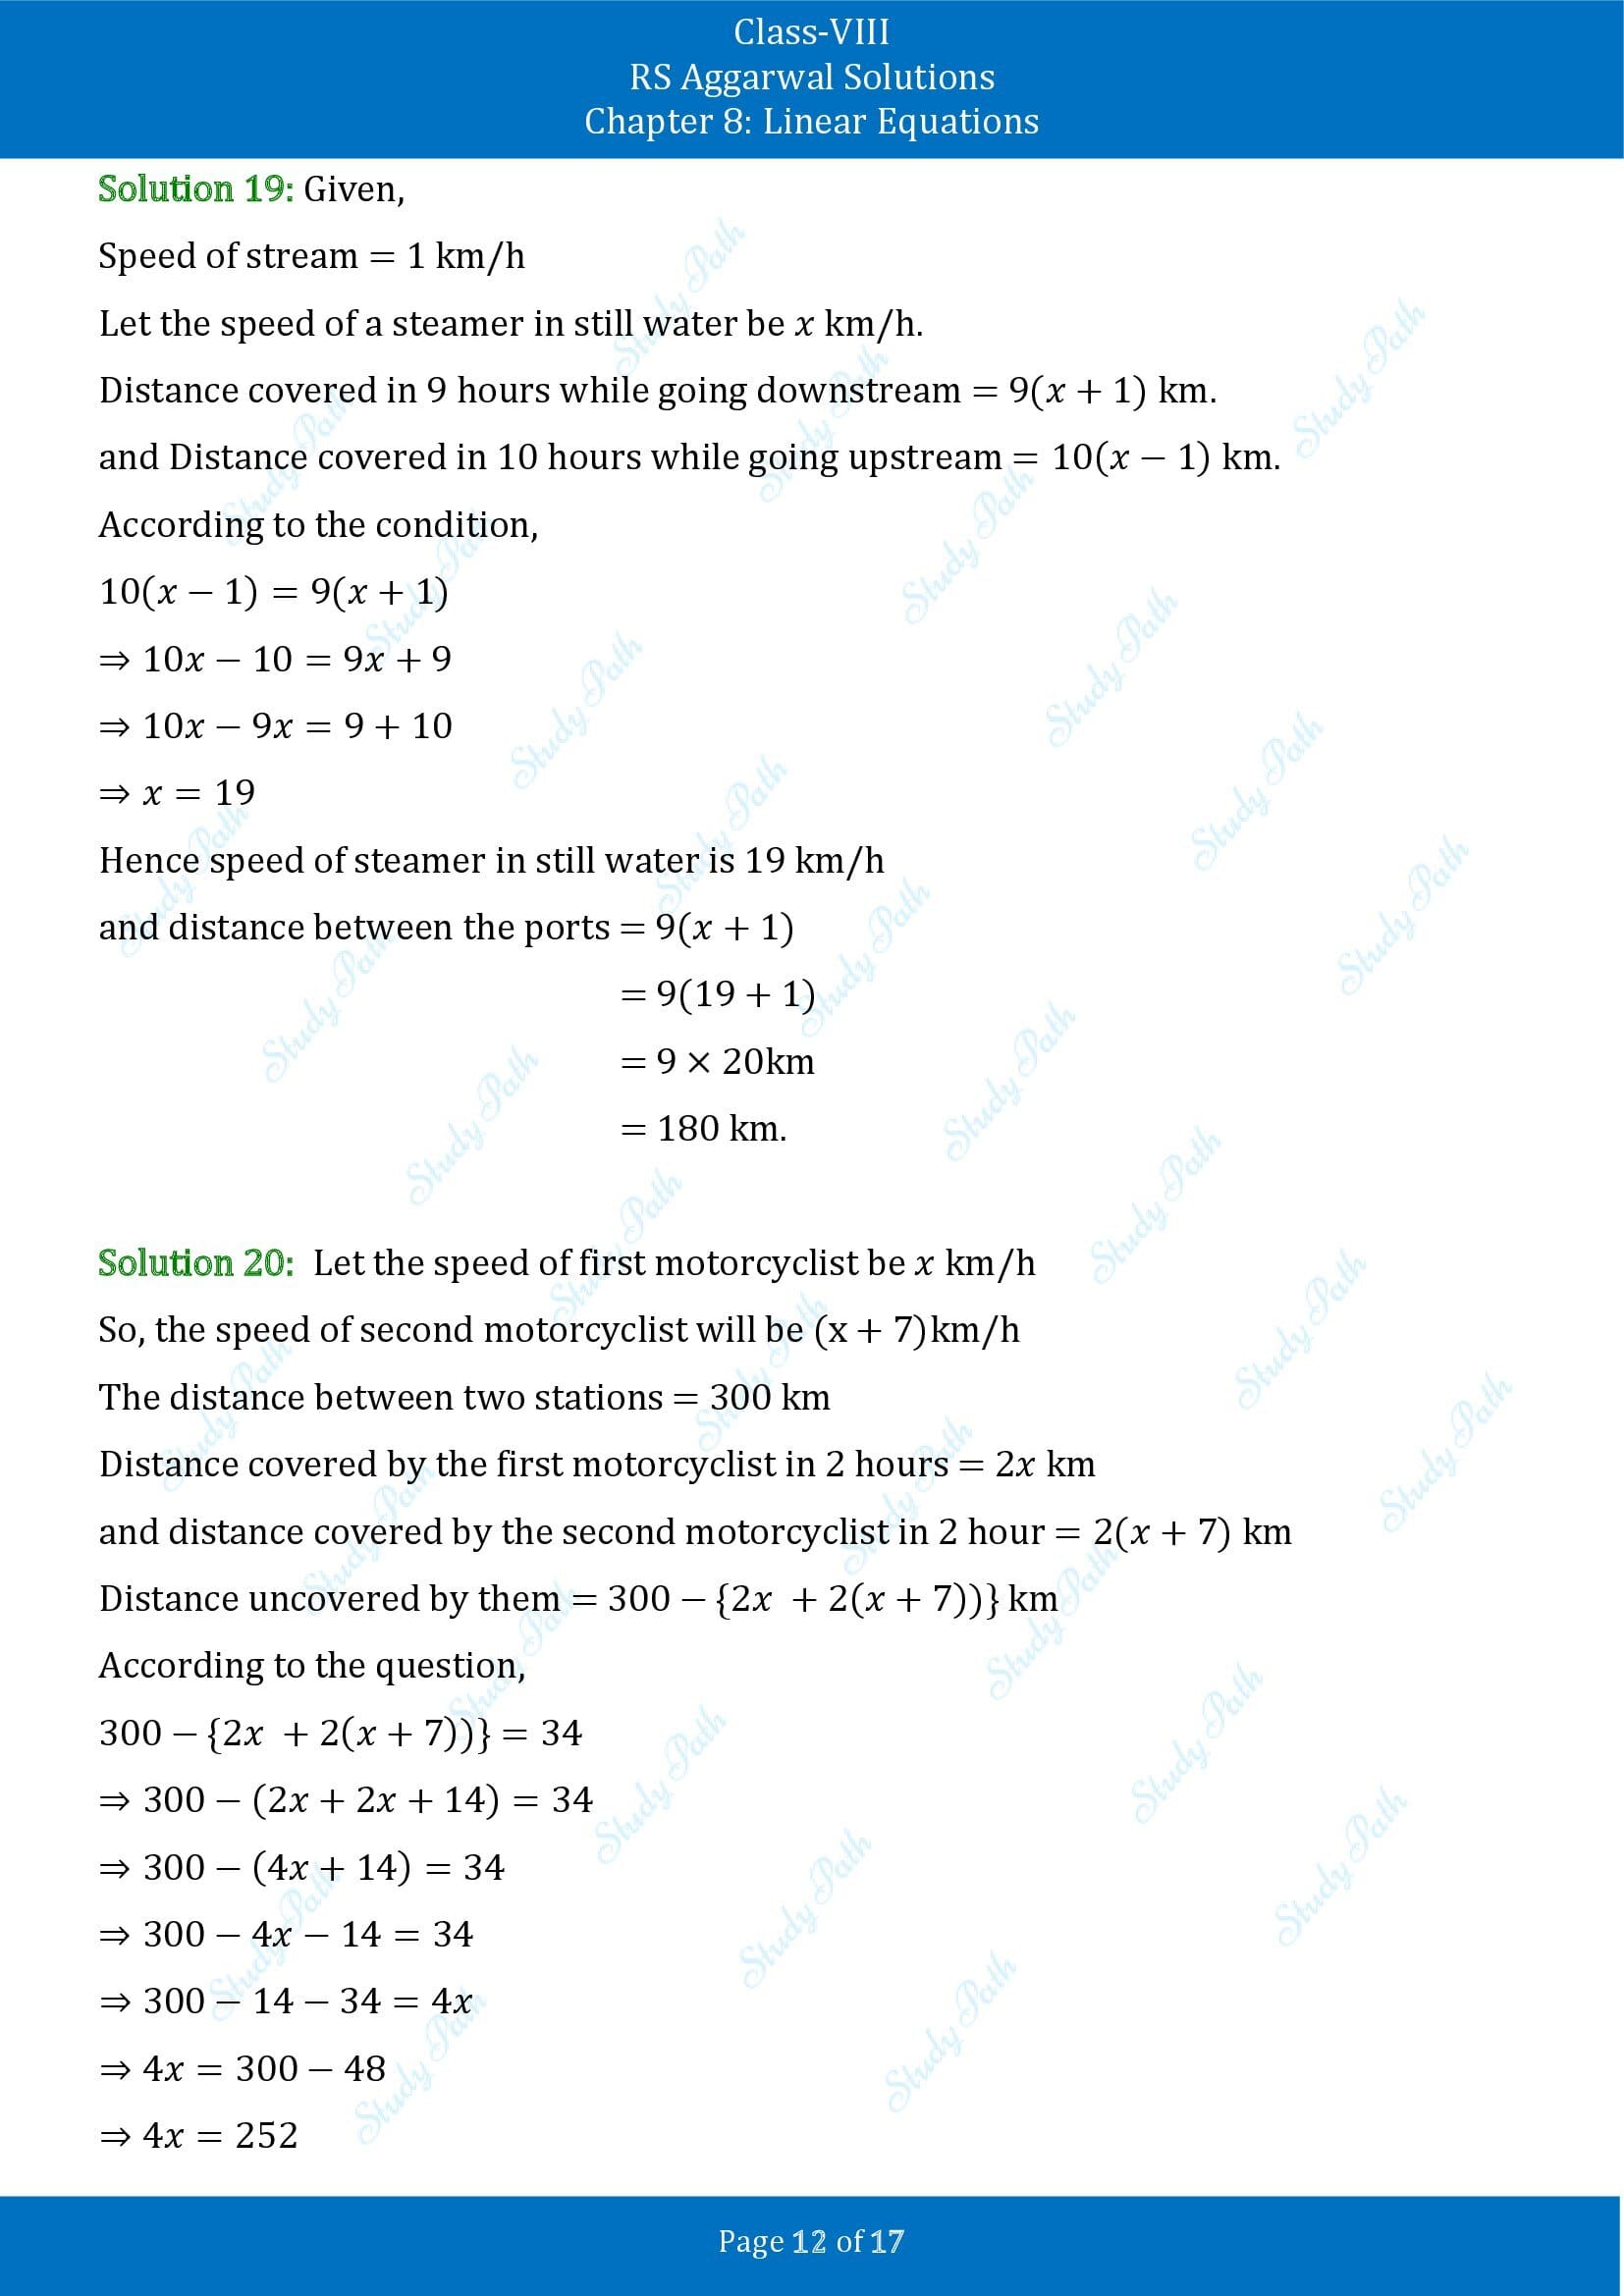 RS Aggarwal Solutions Class 8 Chapter 8 Linear Equations Exercise 8B 00012